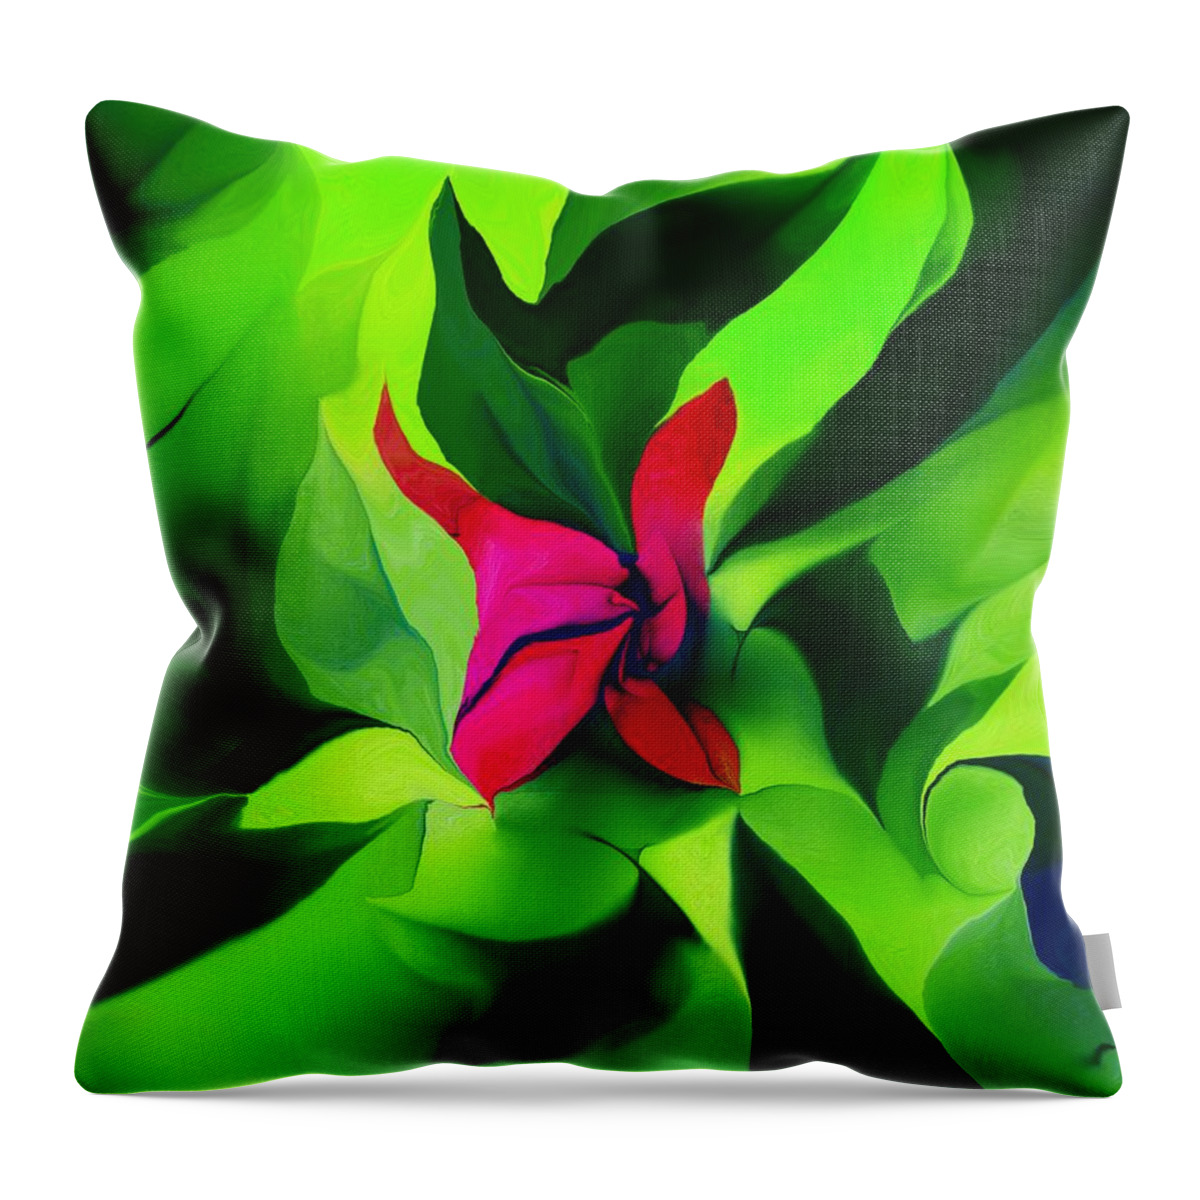 Fine Art Throw Pillow featuring the digital art Floral abstract play by David Lane